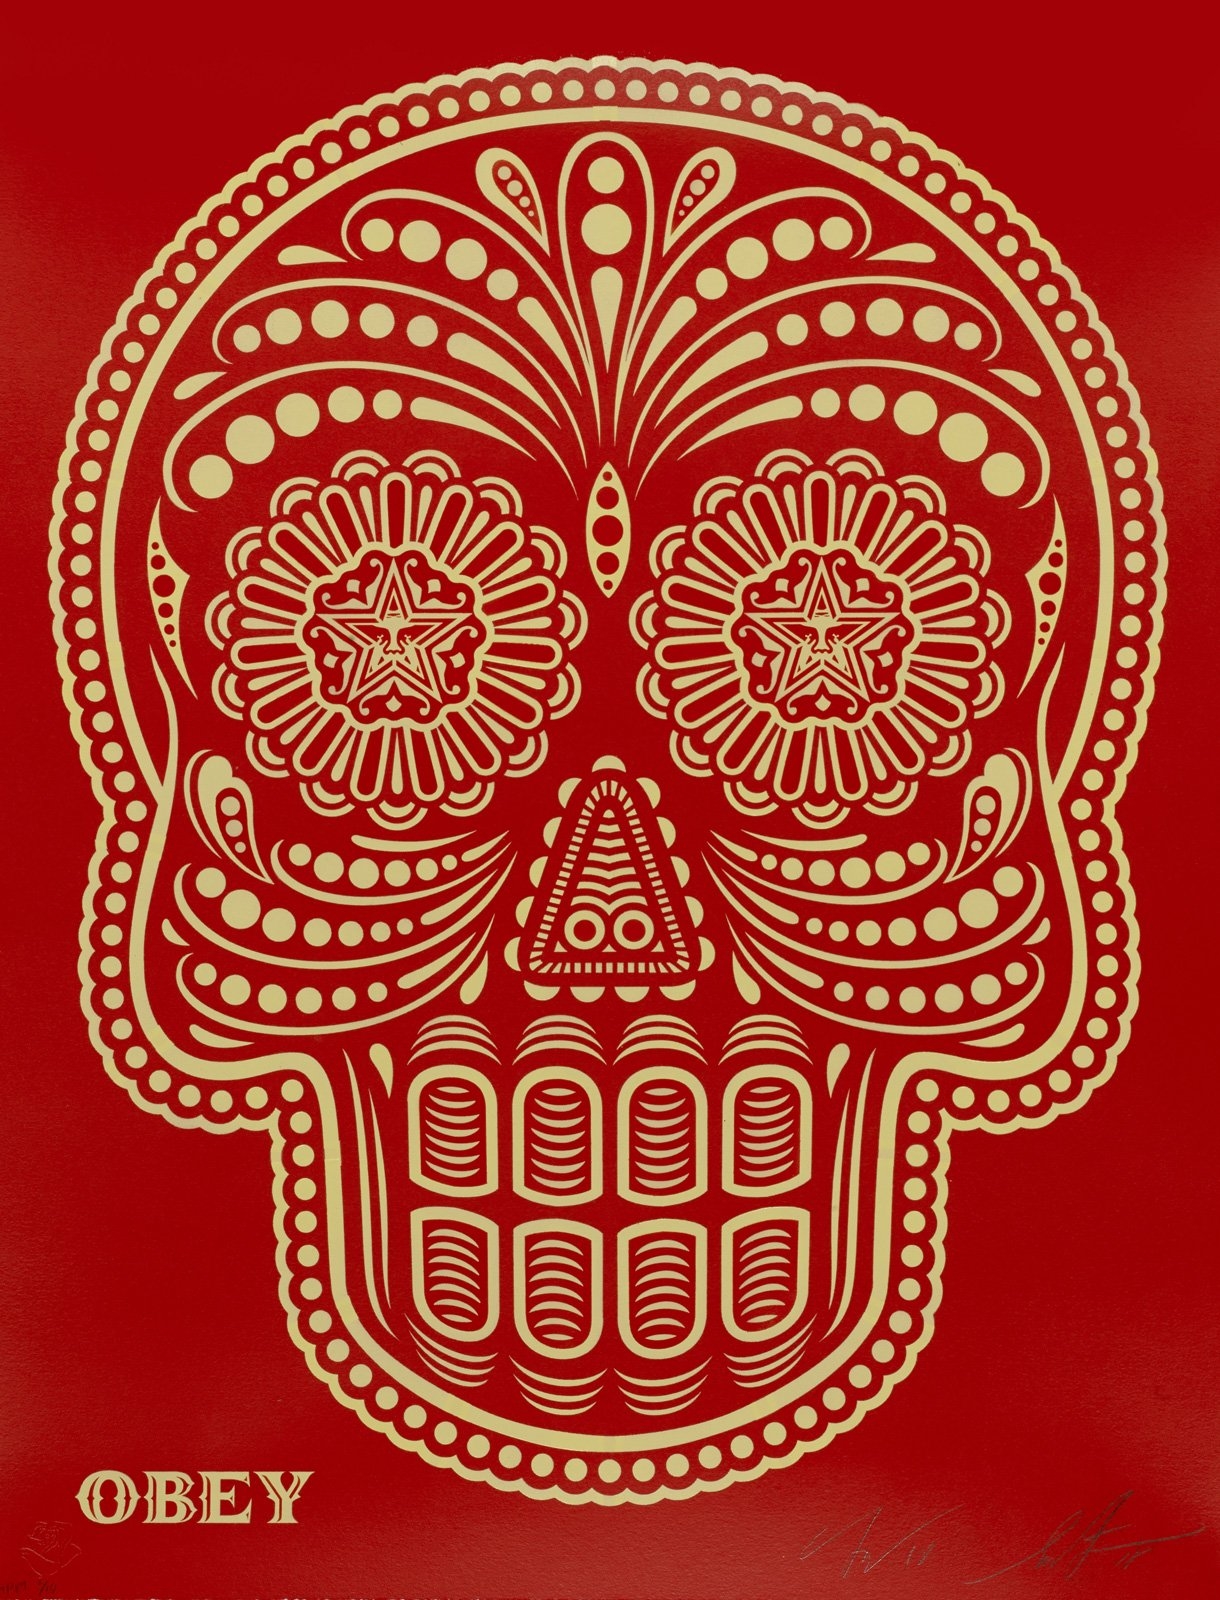 Day of the dead skull (HMP) by Shepard Fairey, 2018